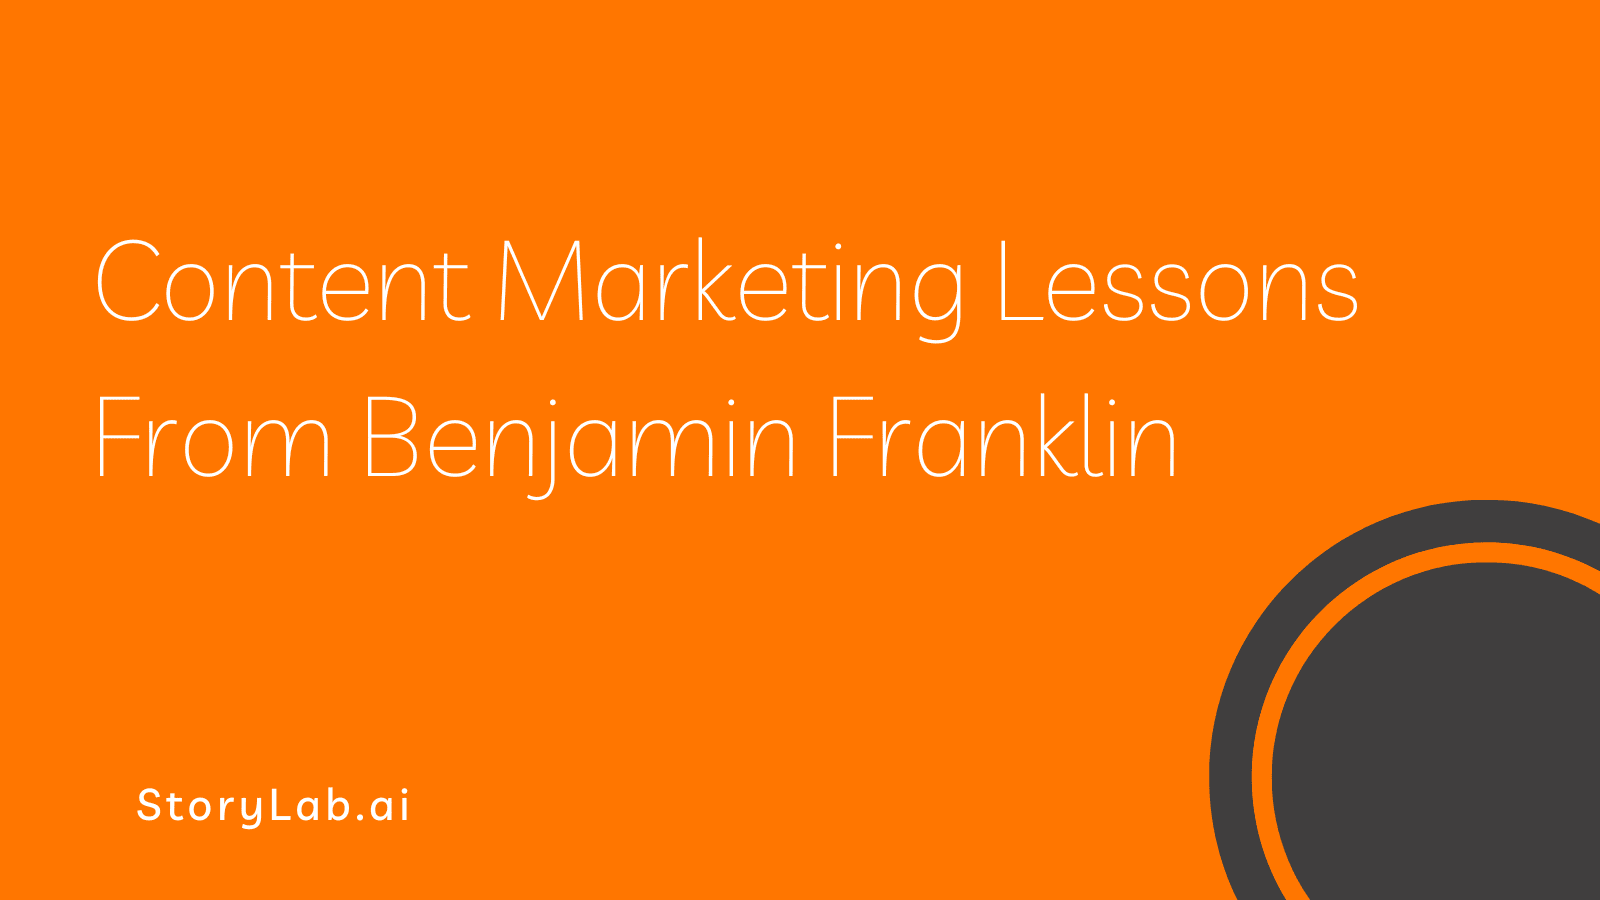 Content Marketing Lessons From Benjamin Franklin